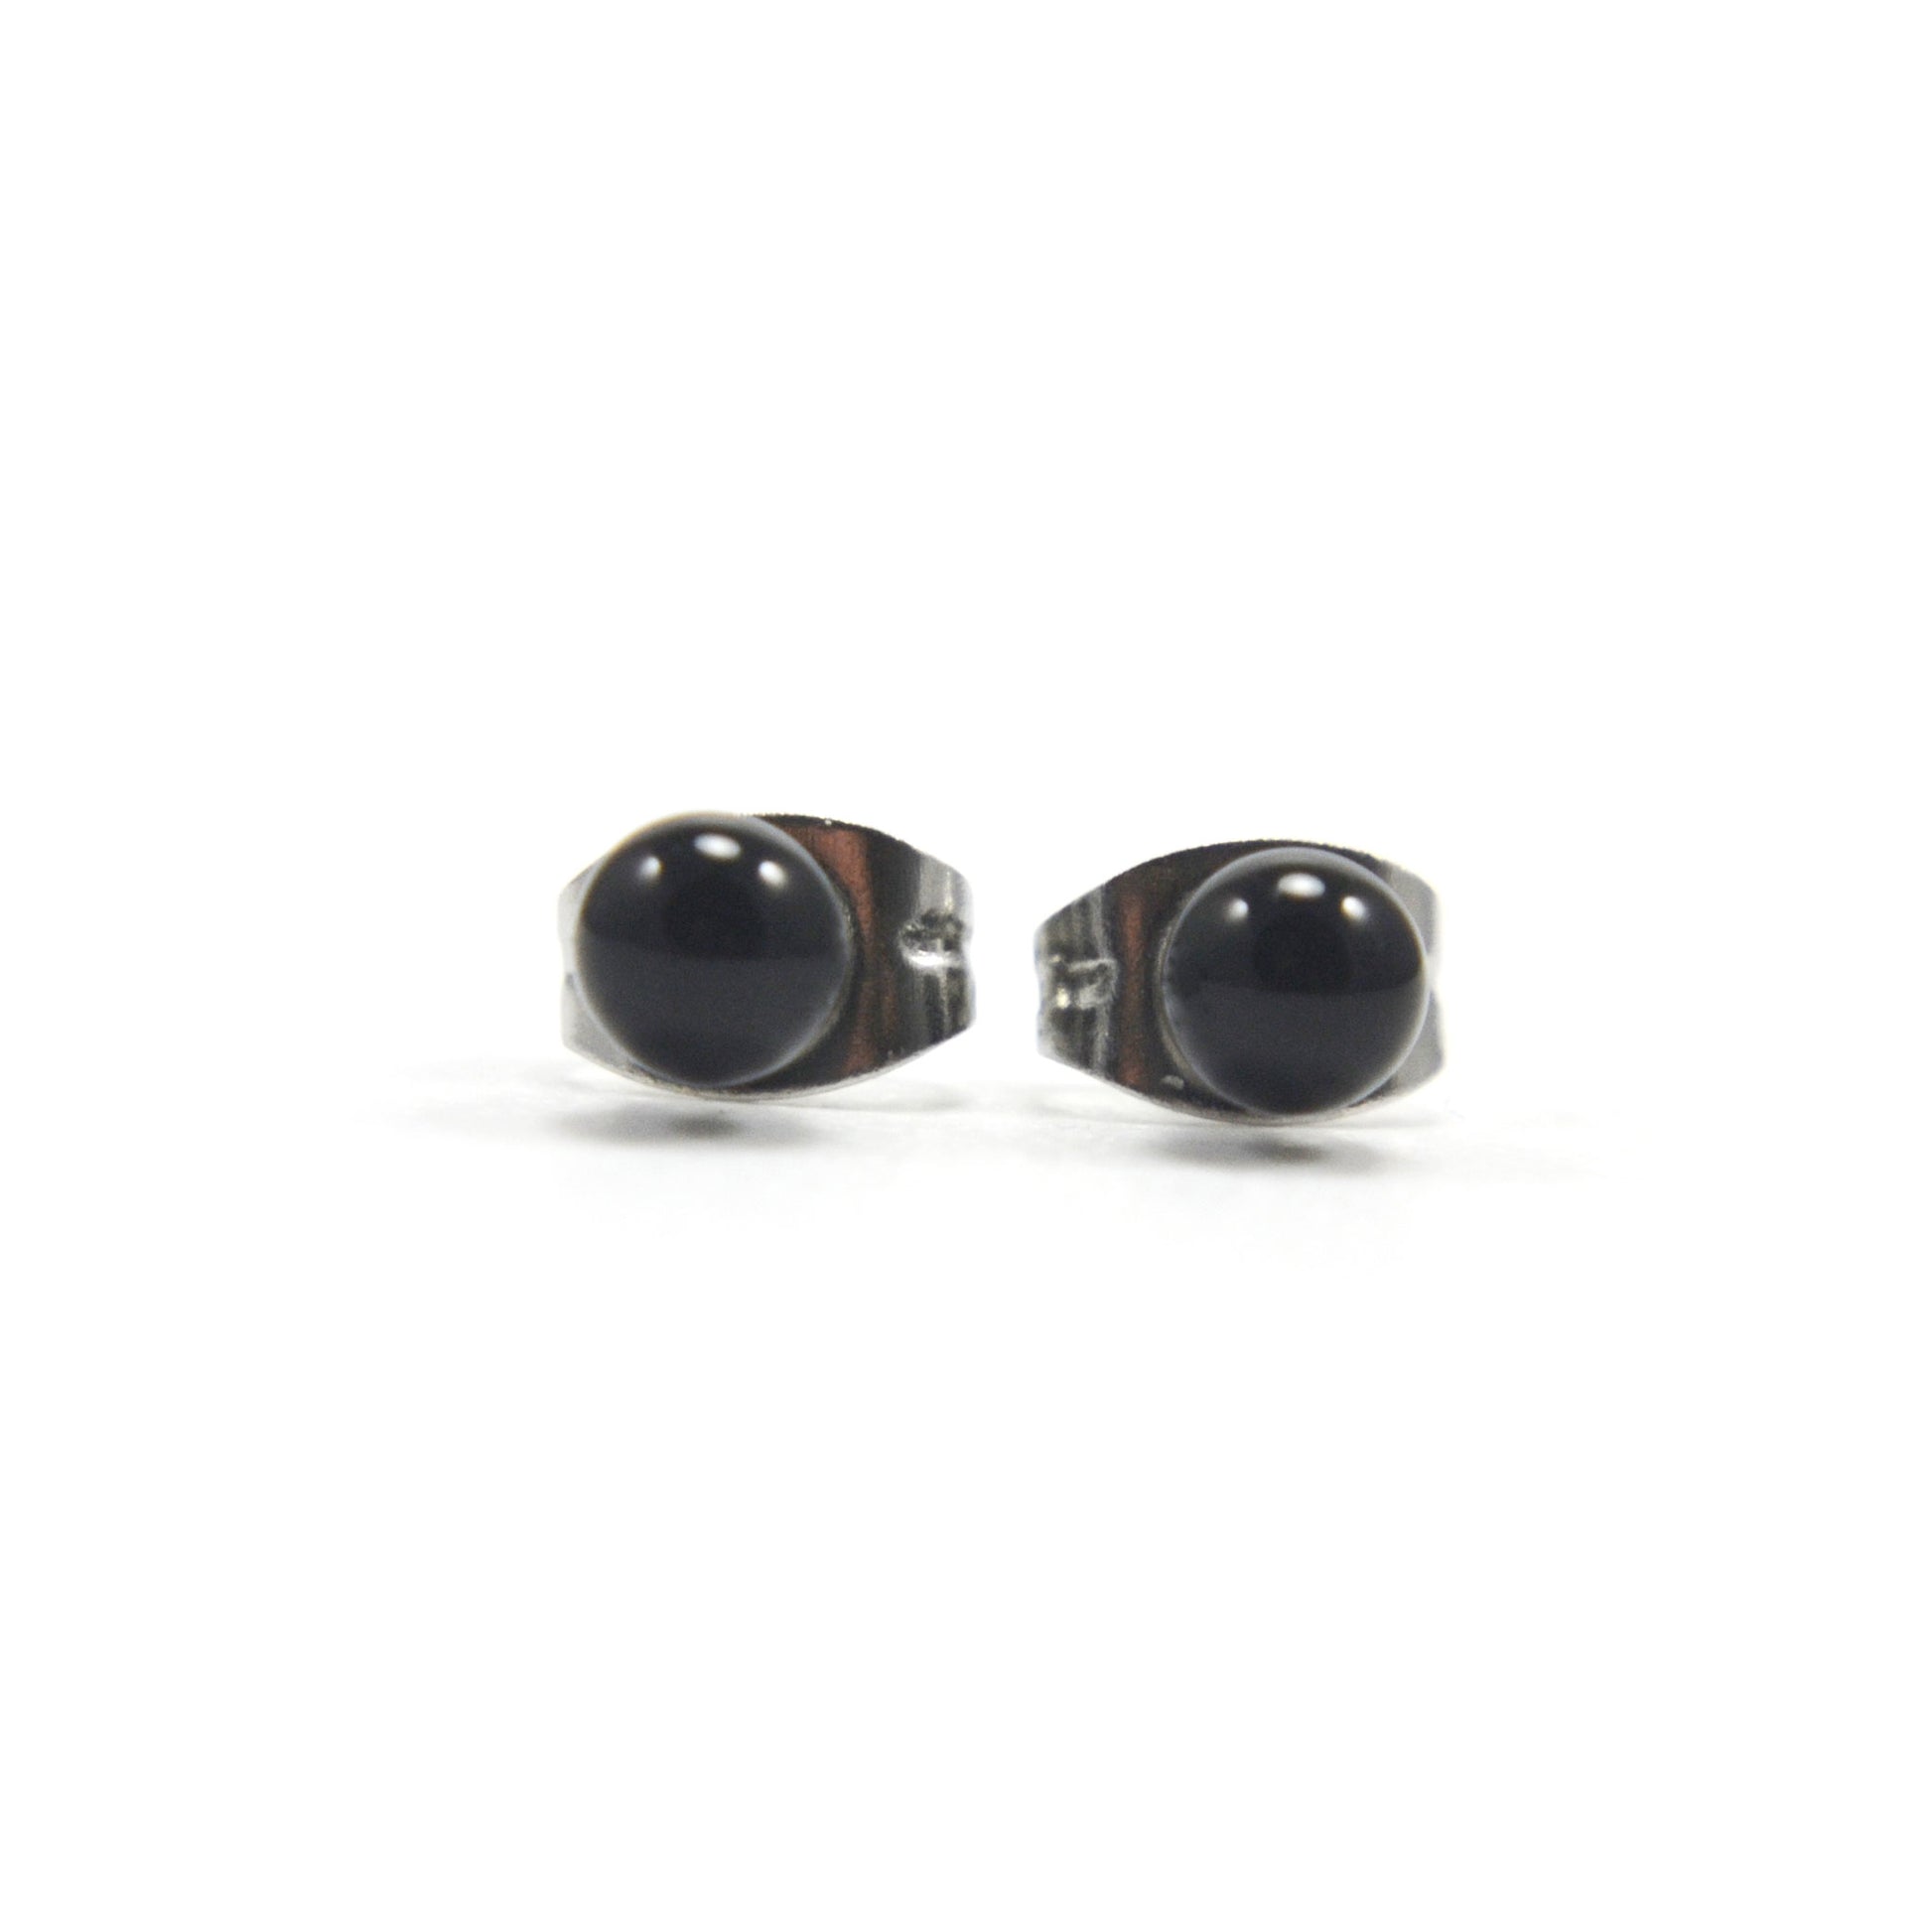 Front view of small black onyx earrings studs